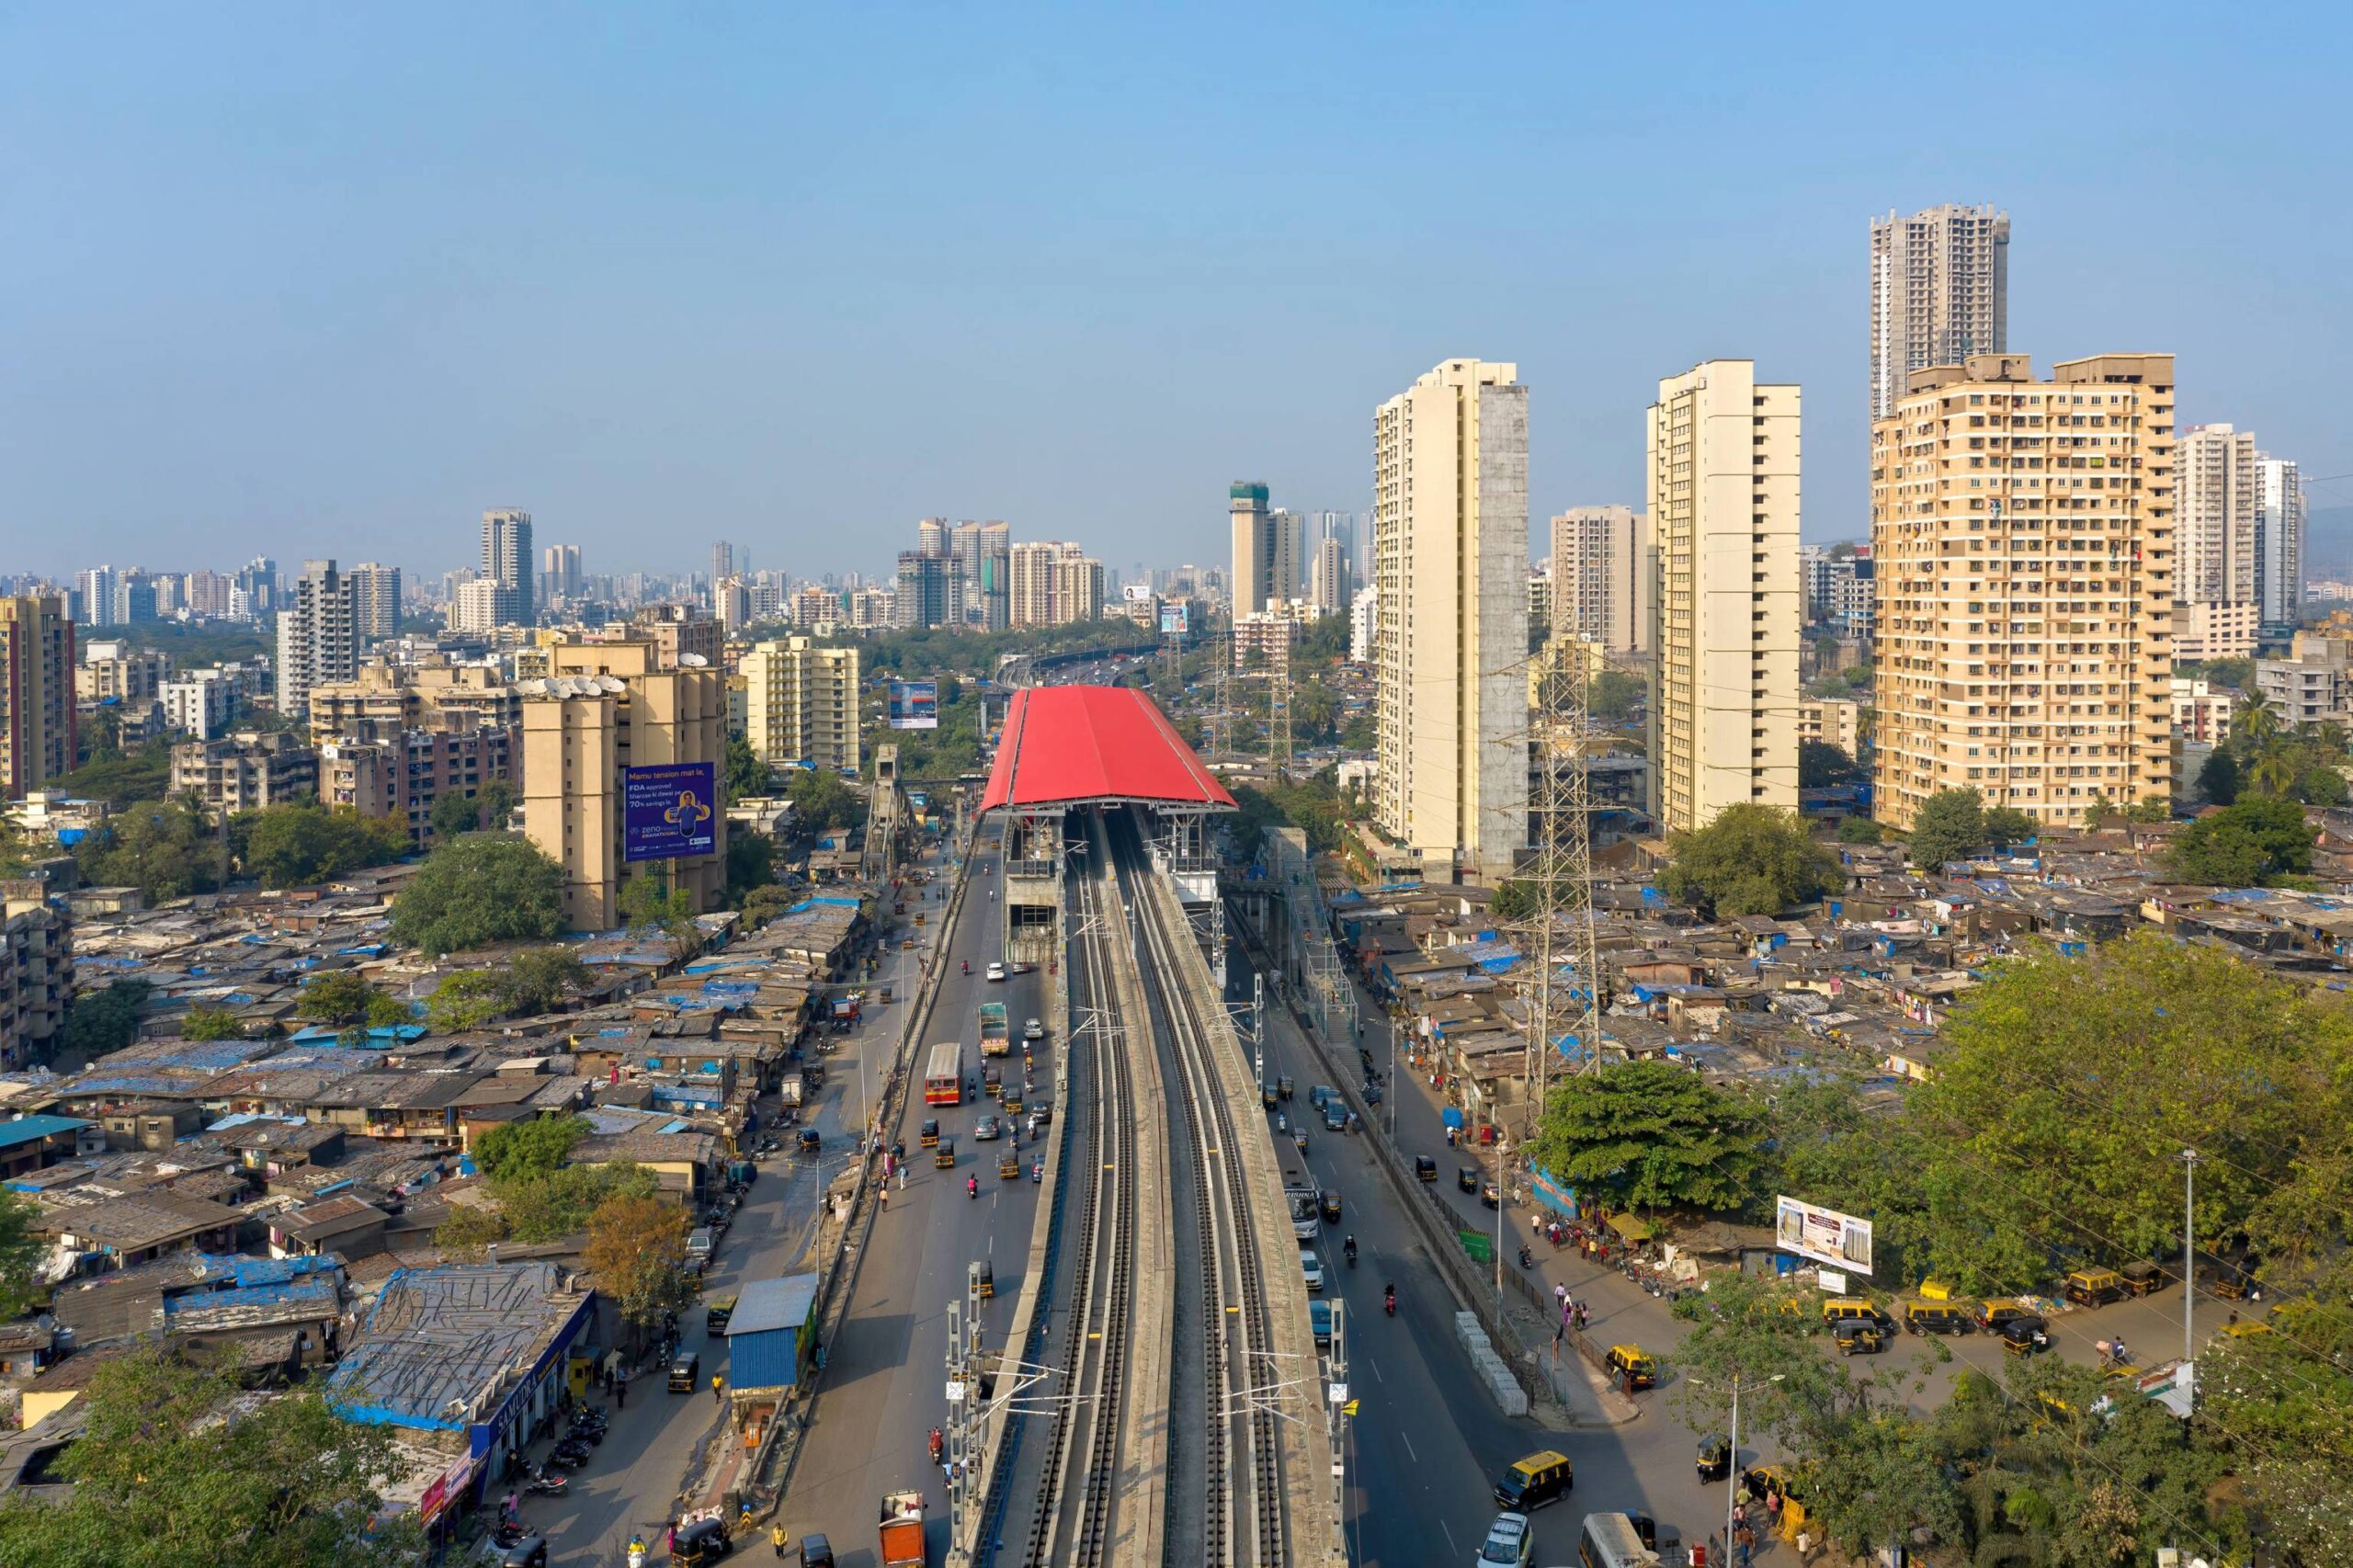 Mumbai Metro Stations-A case for Architects and Architecture-Sourabh Gupta, Archohm 91